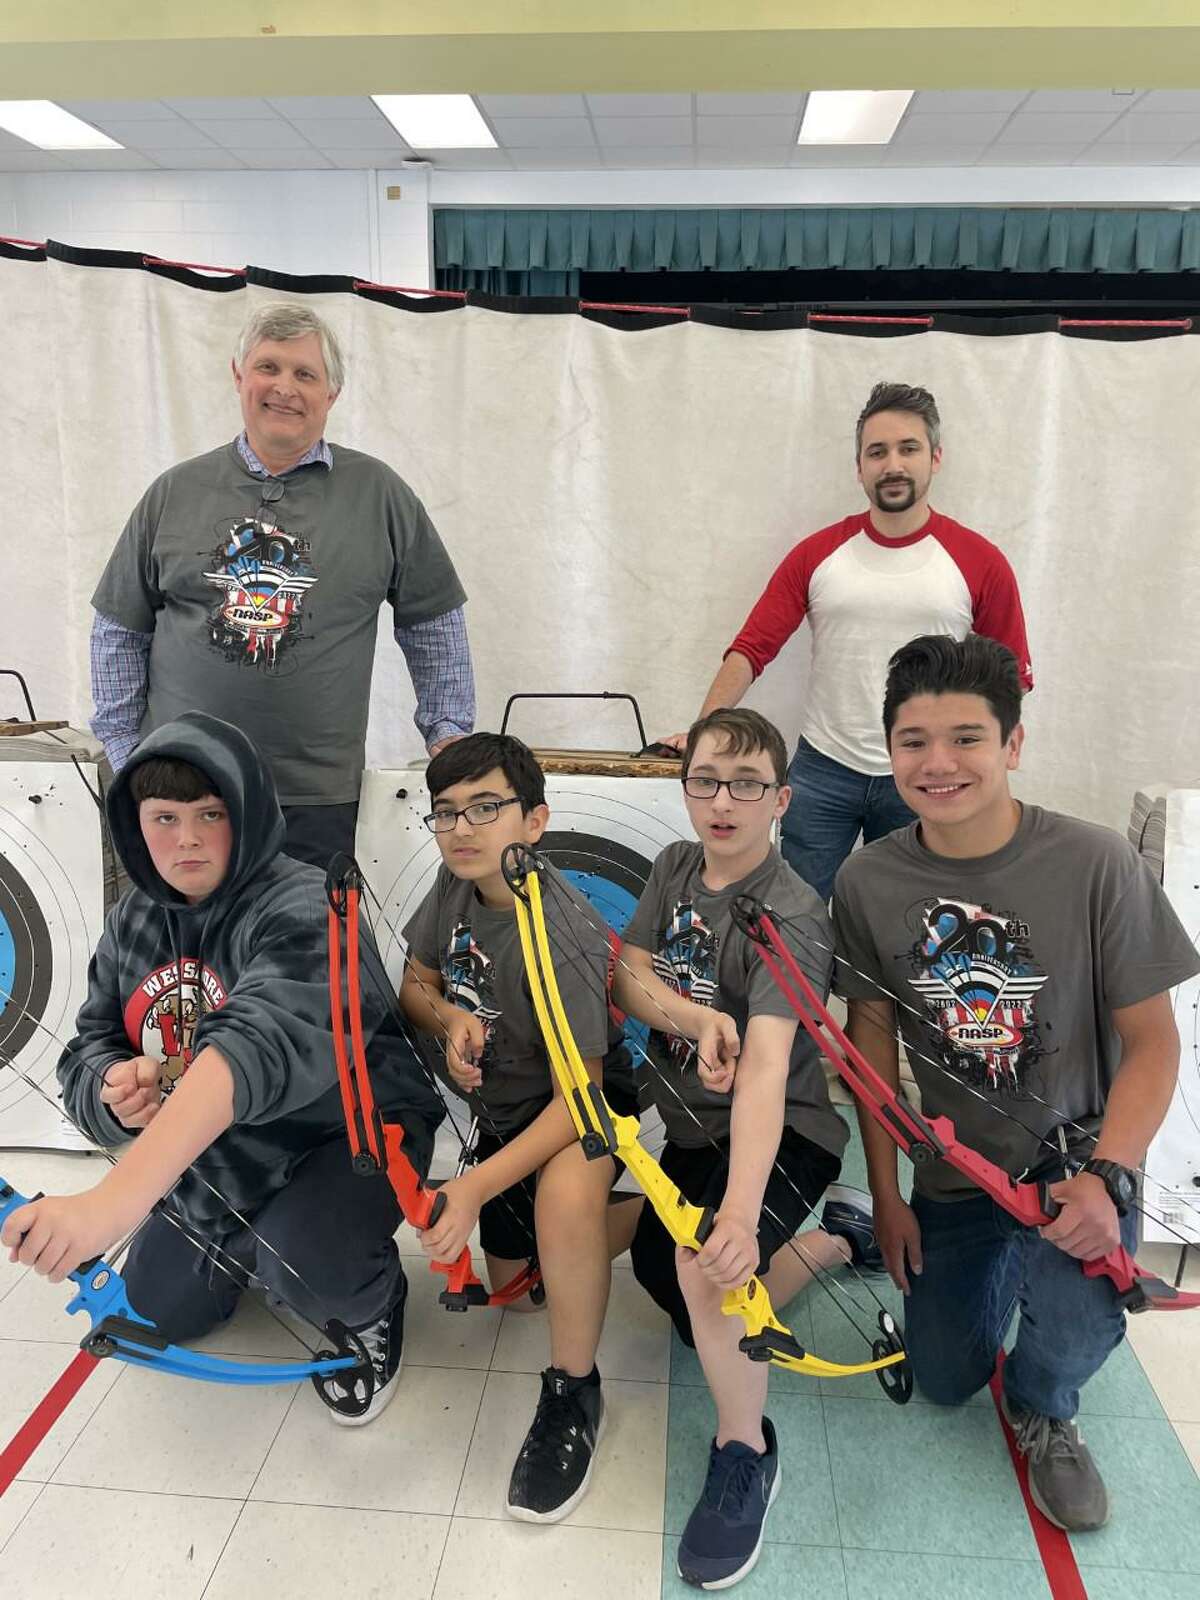 The West Shore Middle School Archery Club members representing the school at last weekend’s Eastern National Championships are, left to right, Jacob LeClaire, Yusuf Genc, David Hancock, and Santiago Penagos. Club advisors David Zunski and Marcus Blair are pictured behind the archers.